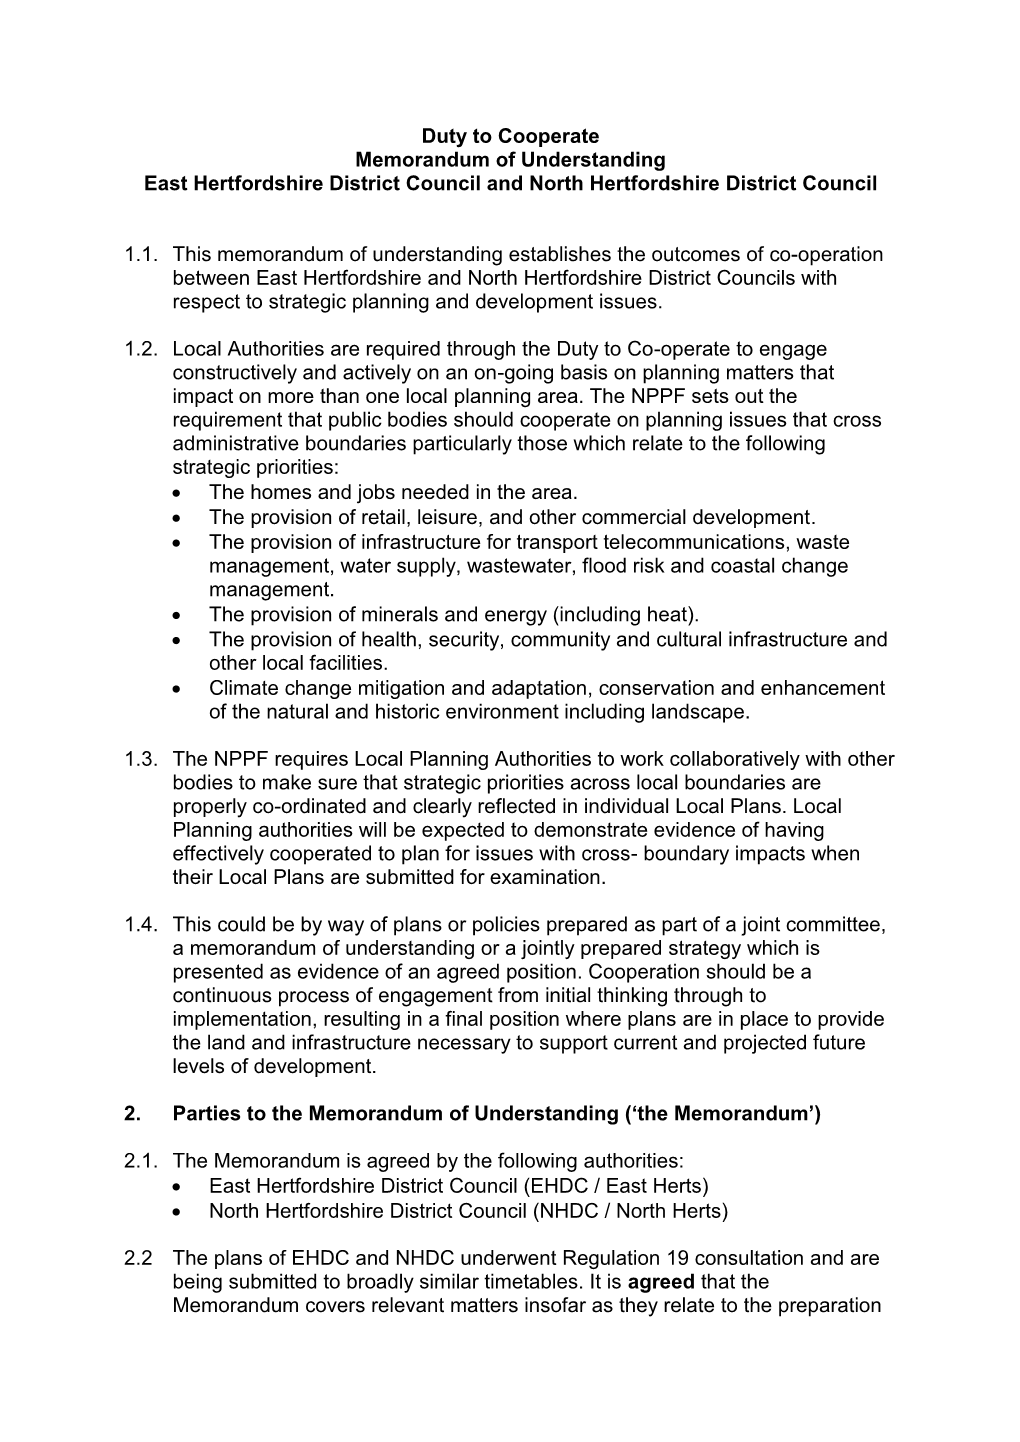 Duty to Cooperate Memorandum of Understanding East Hertfordshire District Council and North Hertfordshire District Council